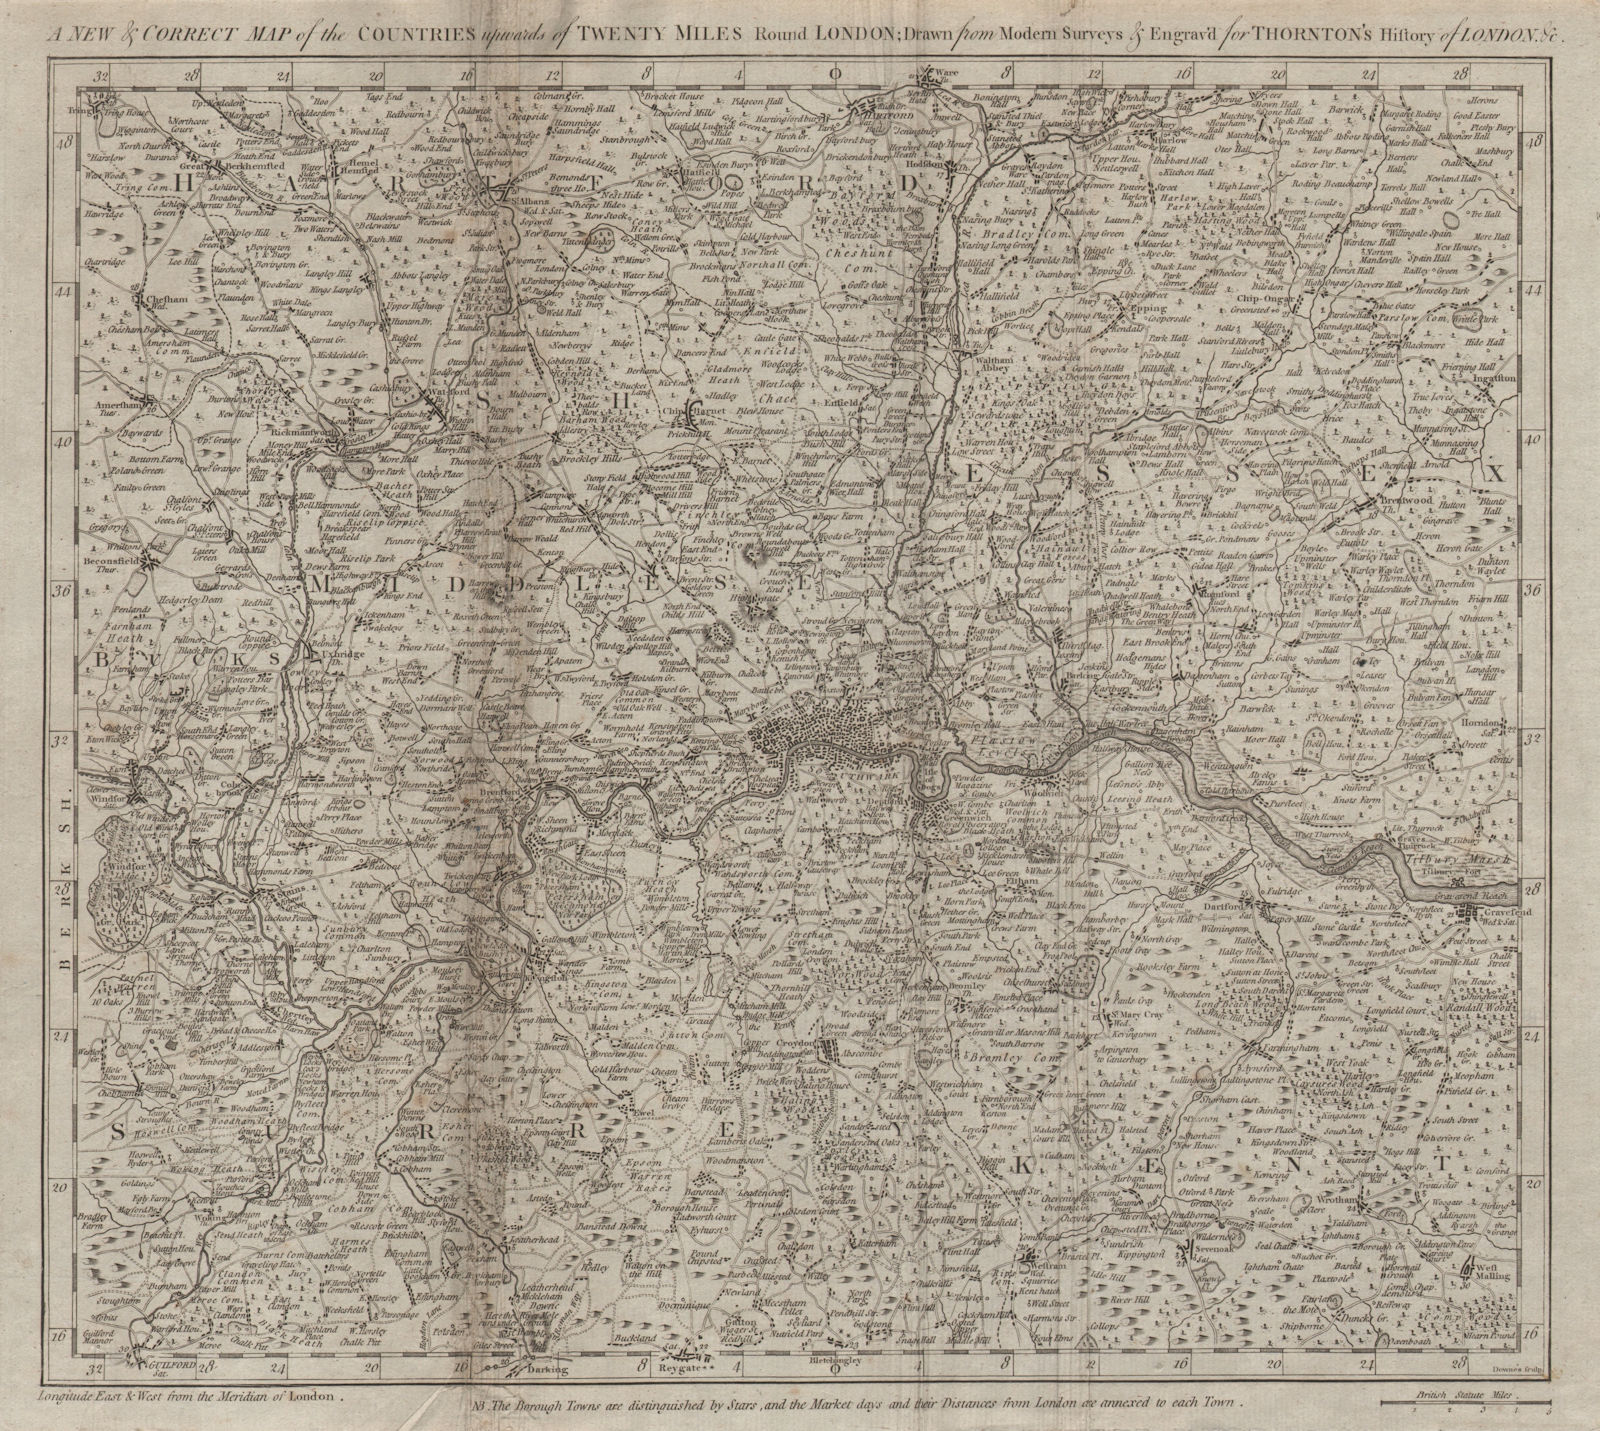 A new and correct map of the countries… 20 miles round London. THORNTON 1784